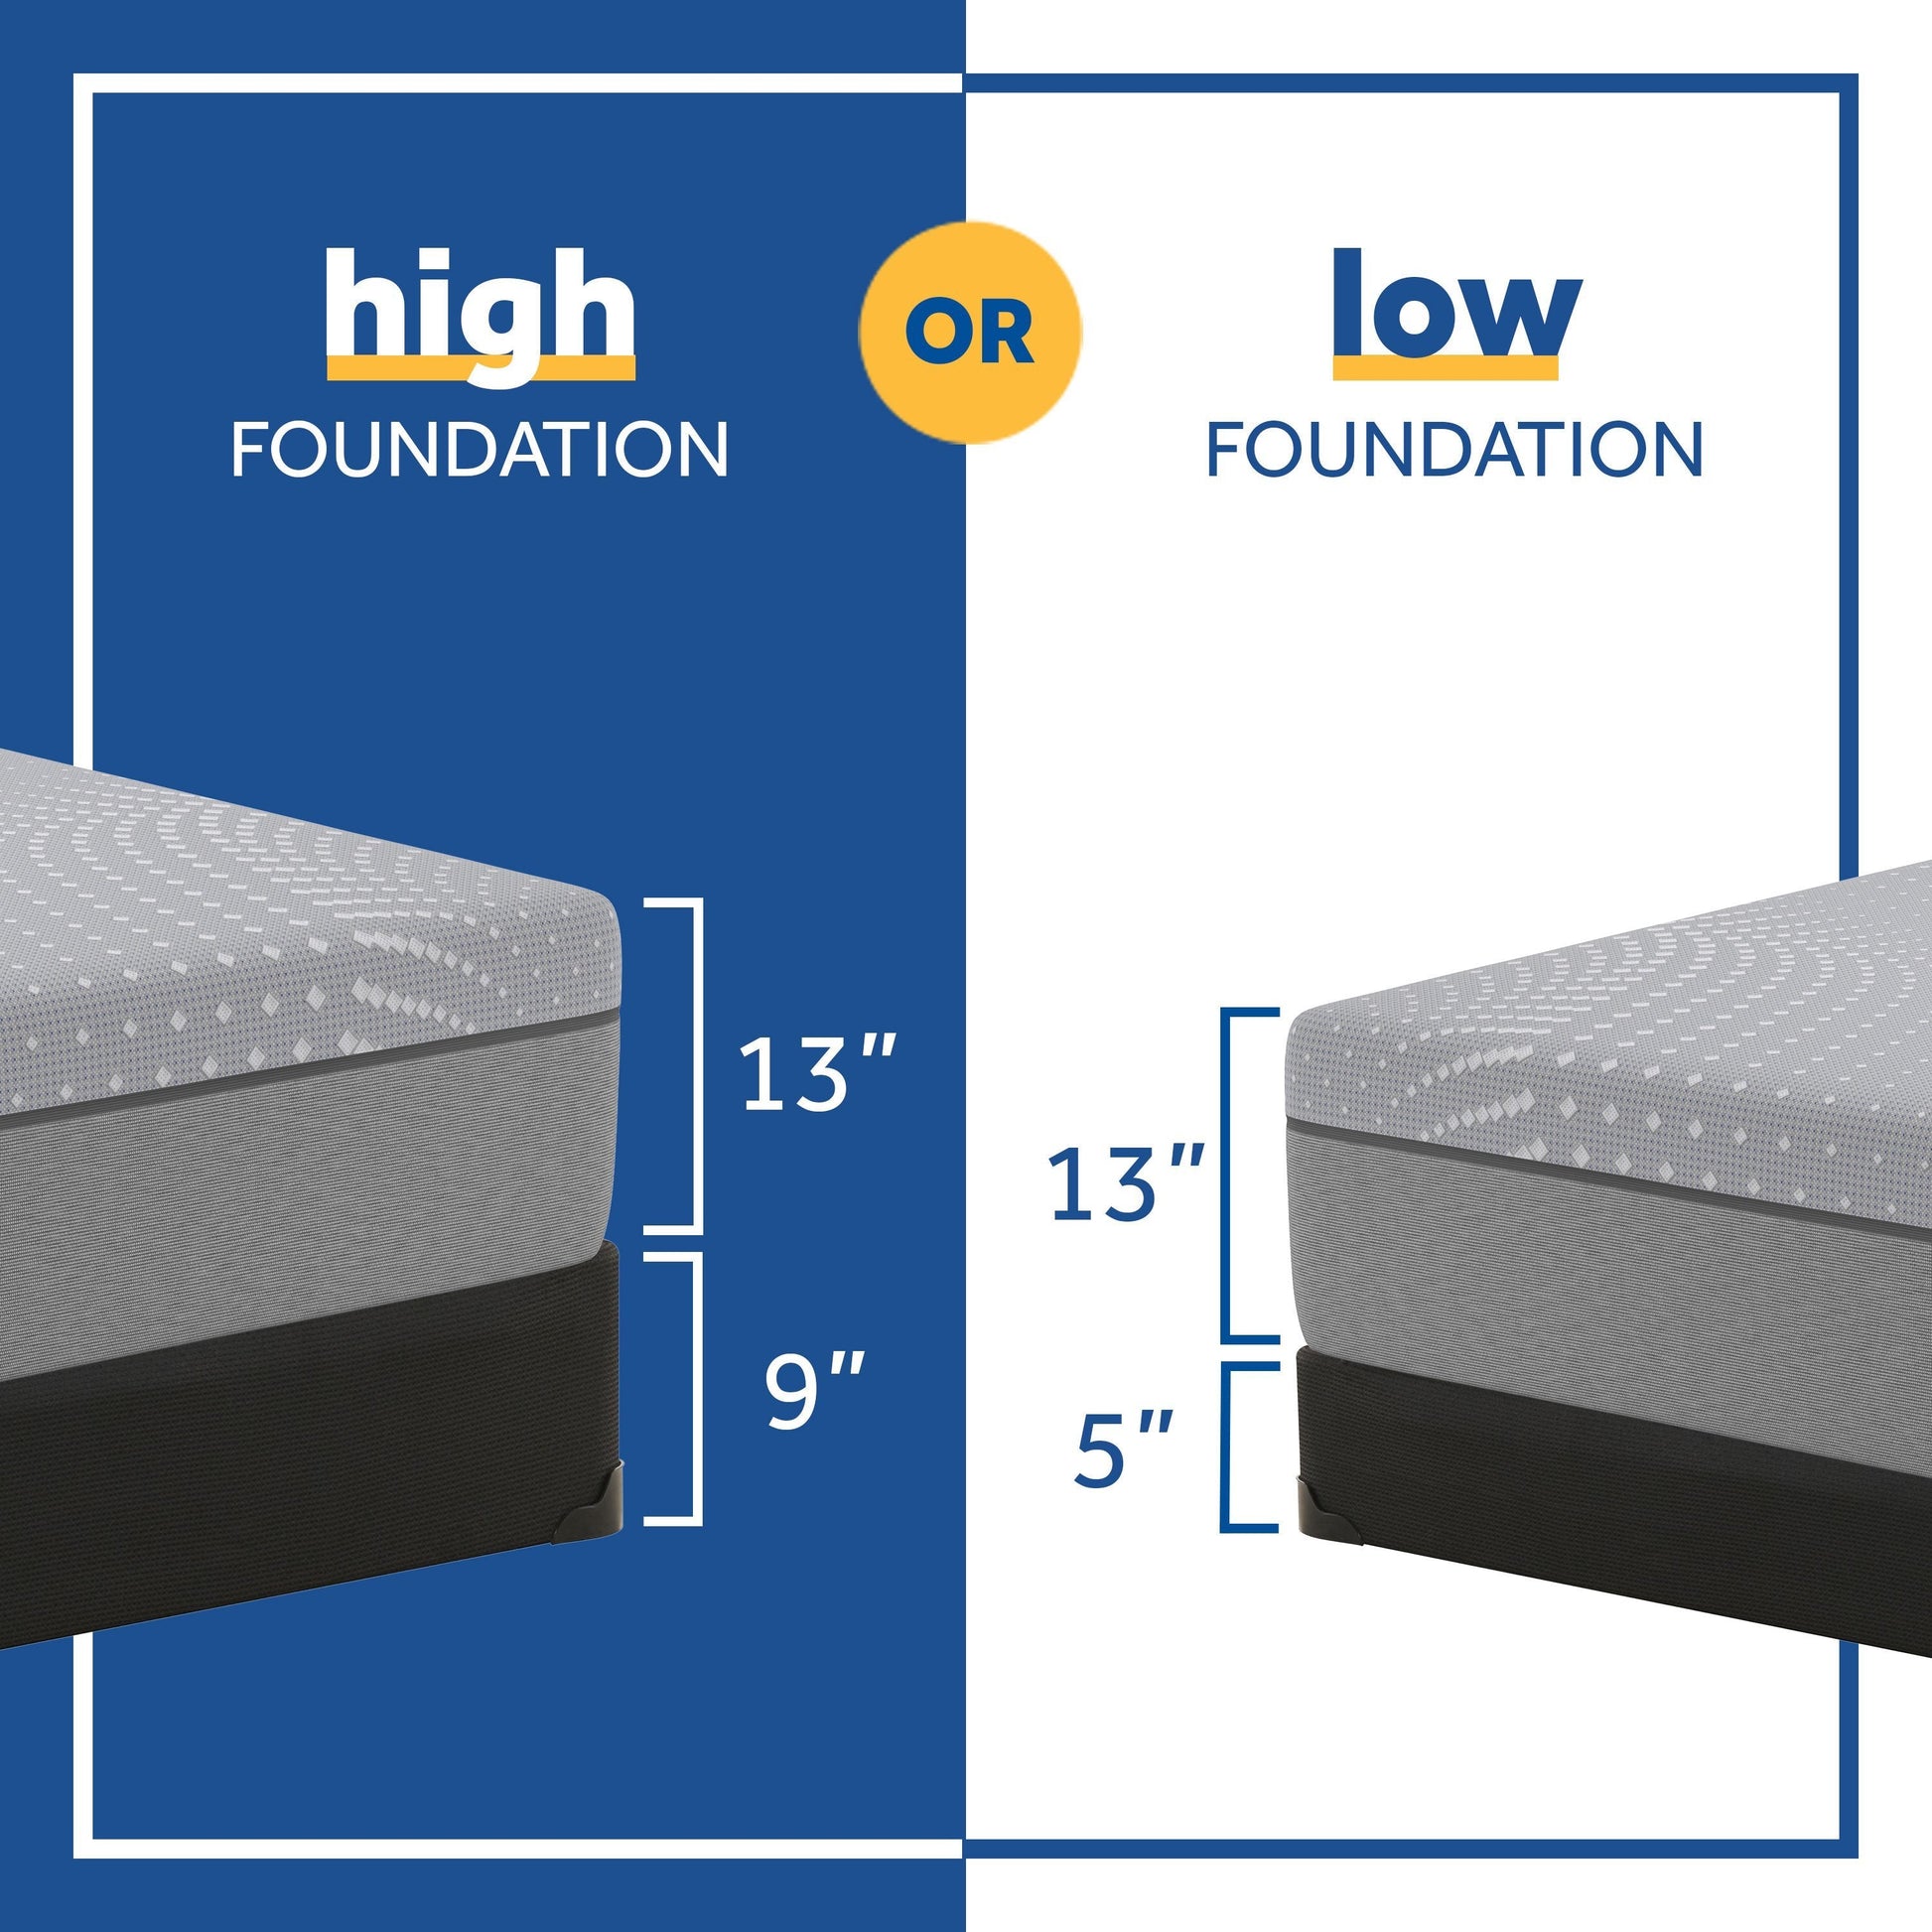 Sealy Hybrid Haralson Soft Mattress Foundation Guide